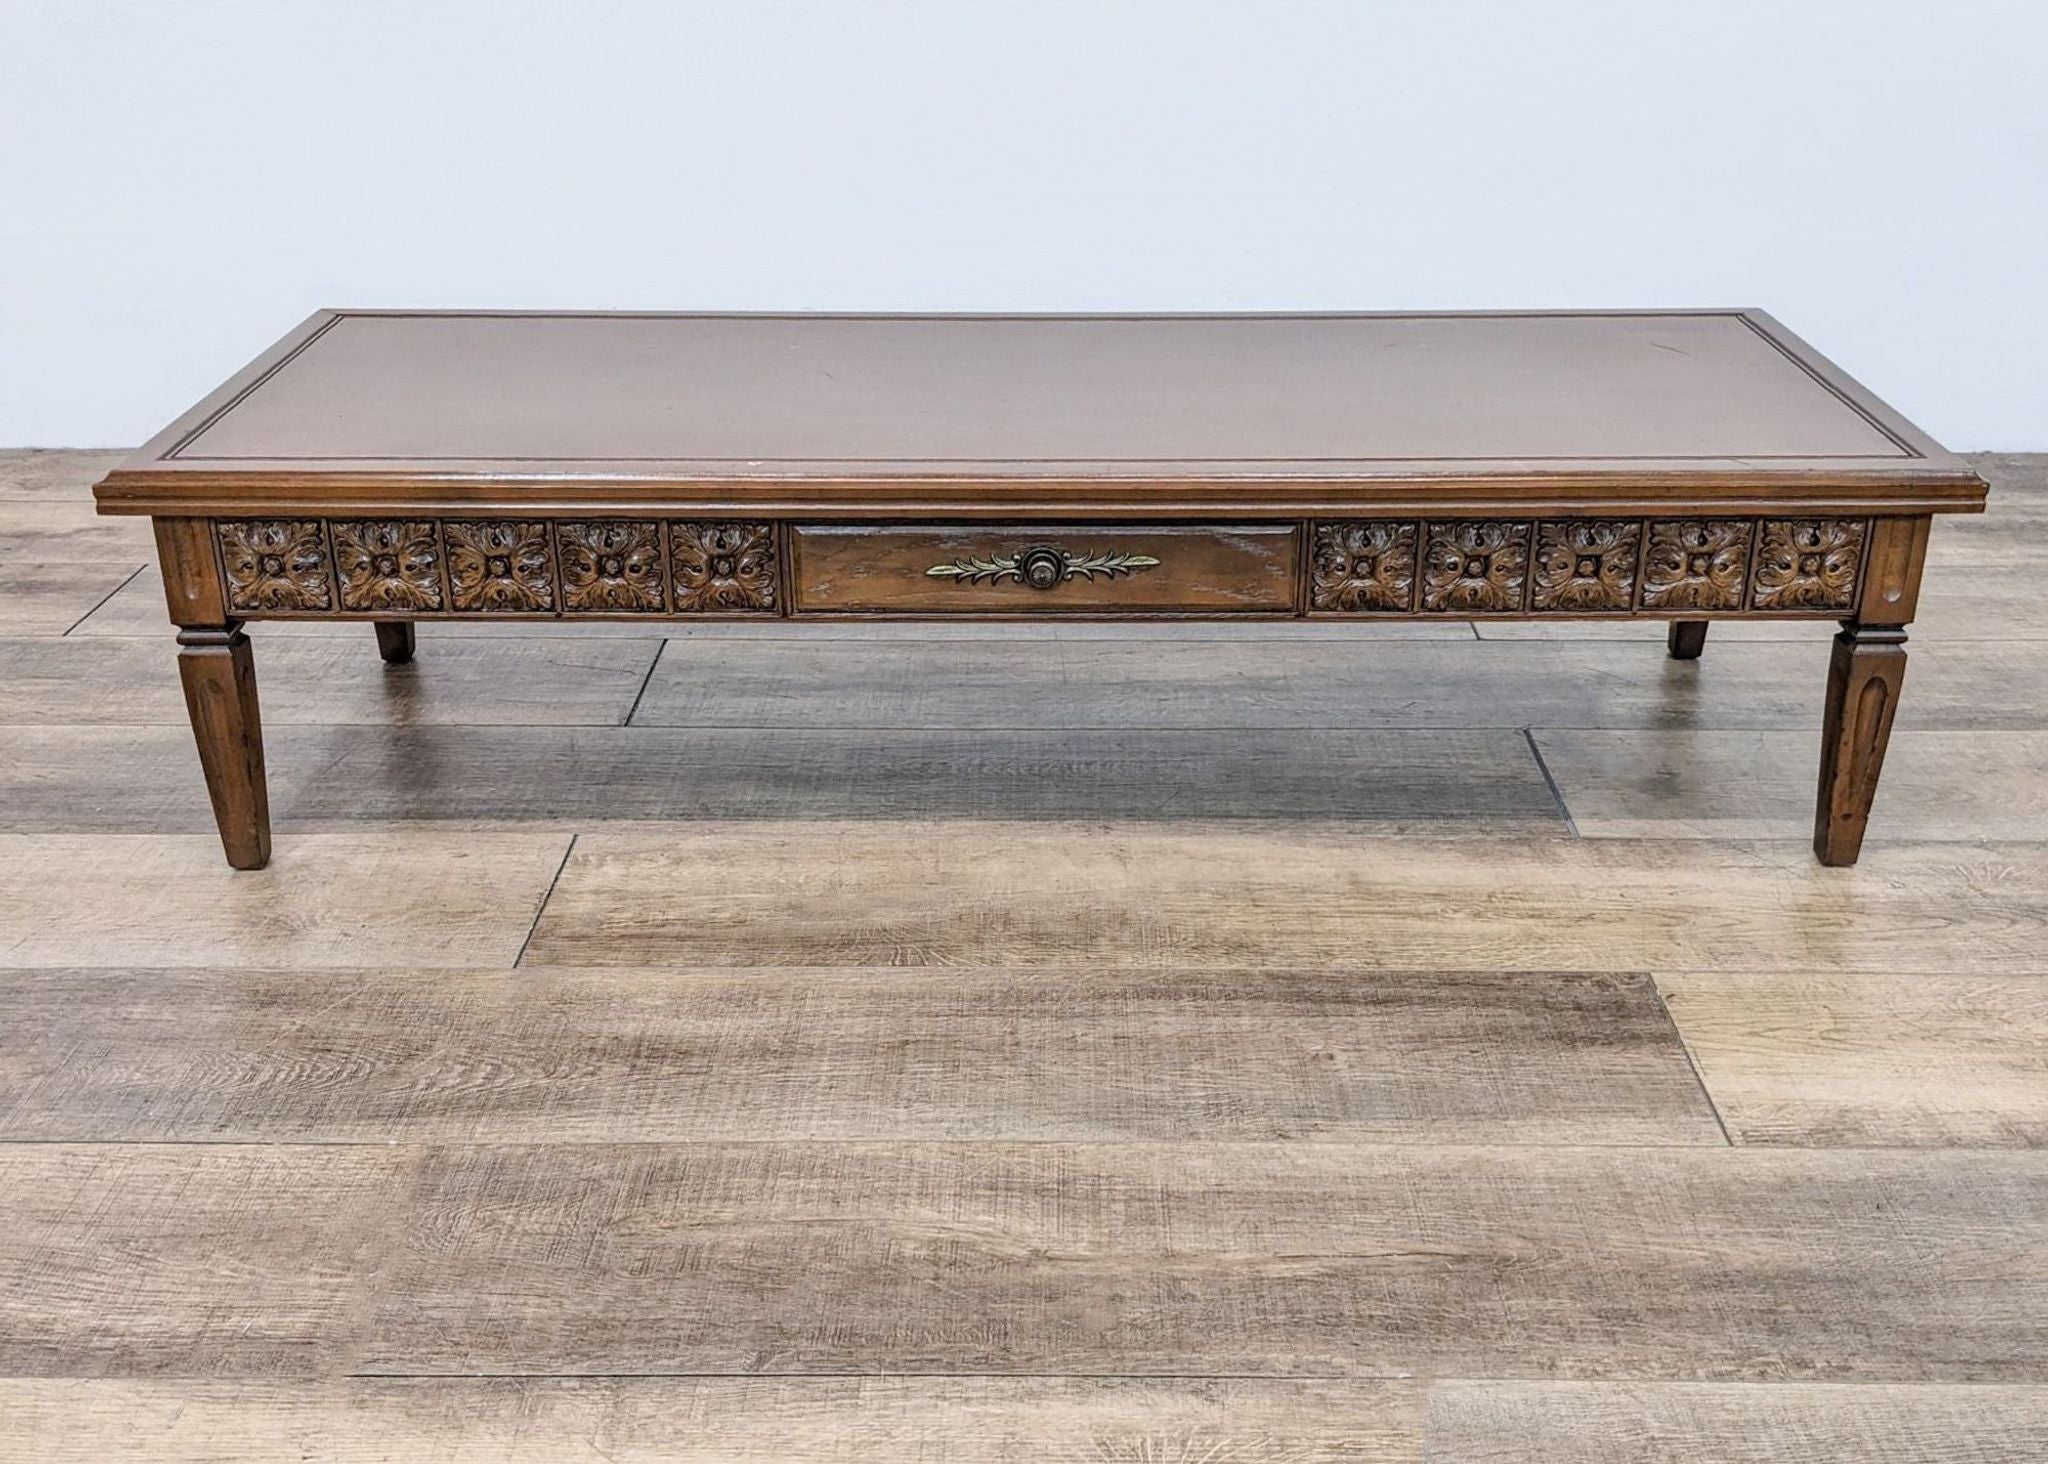 Wooden Reperch coffee table featuring decorative metal backplate on faux drawer amidst carved floral details.